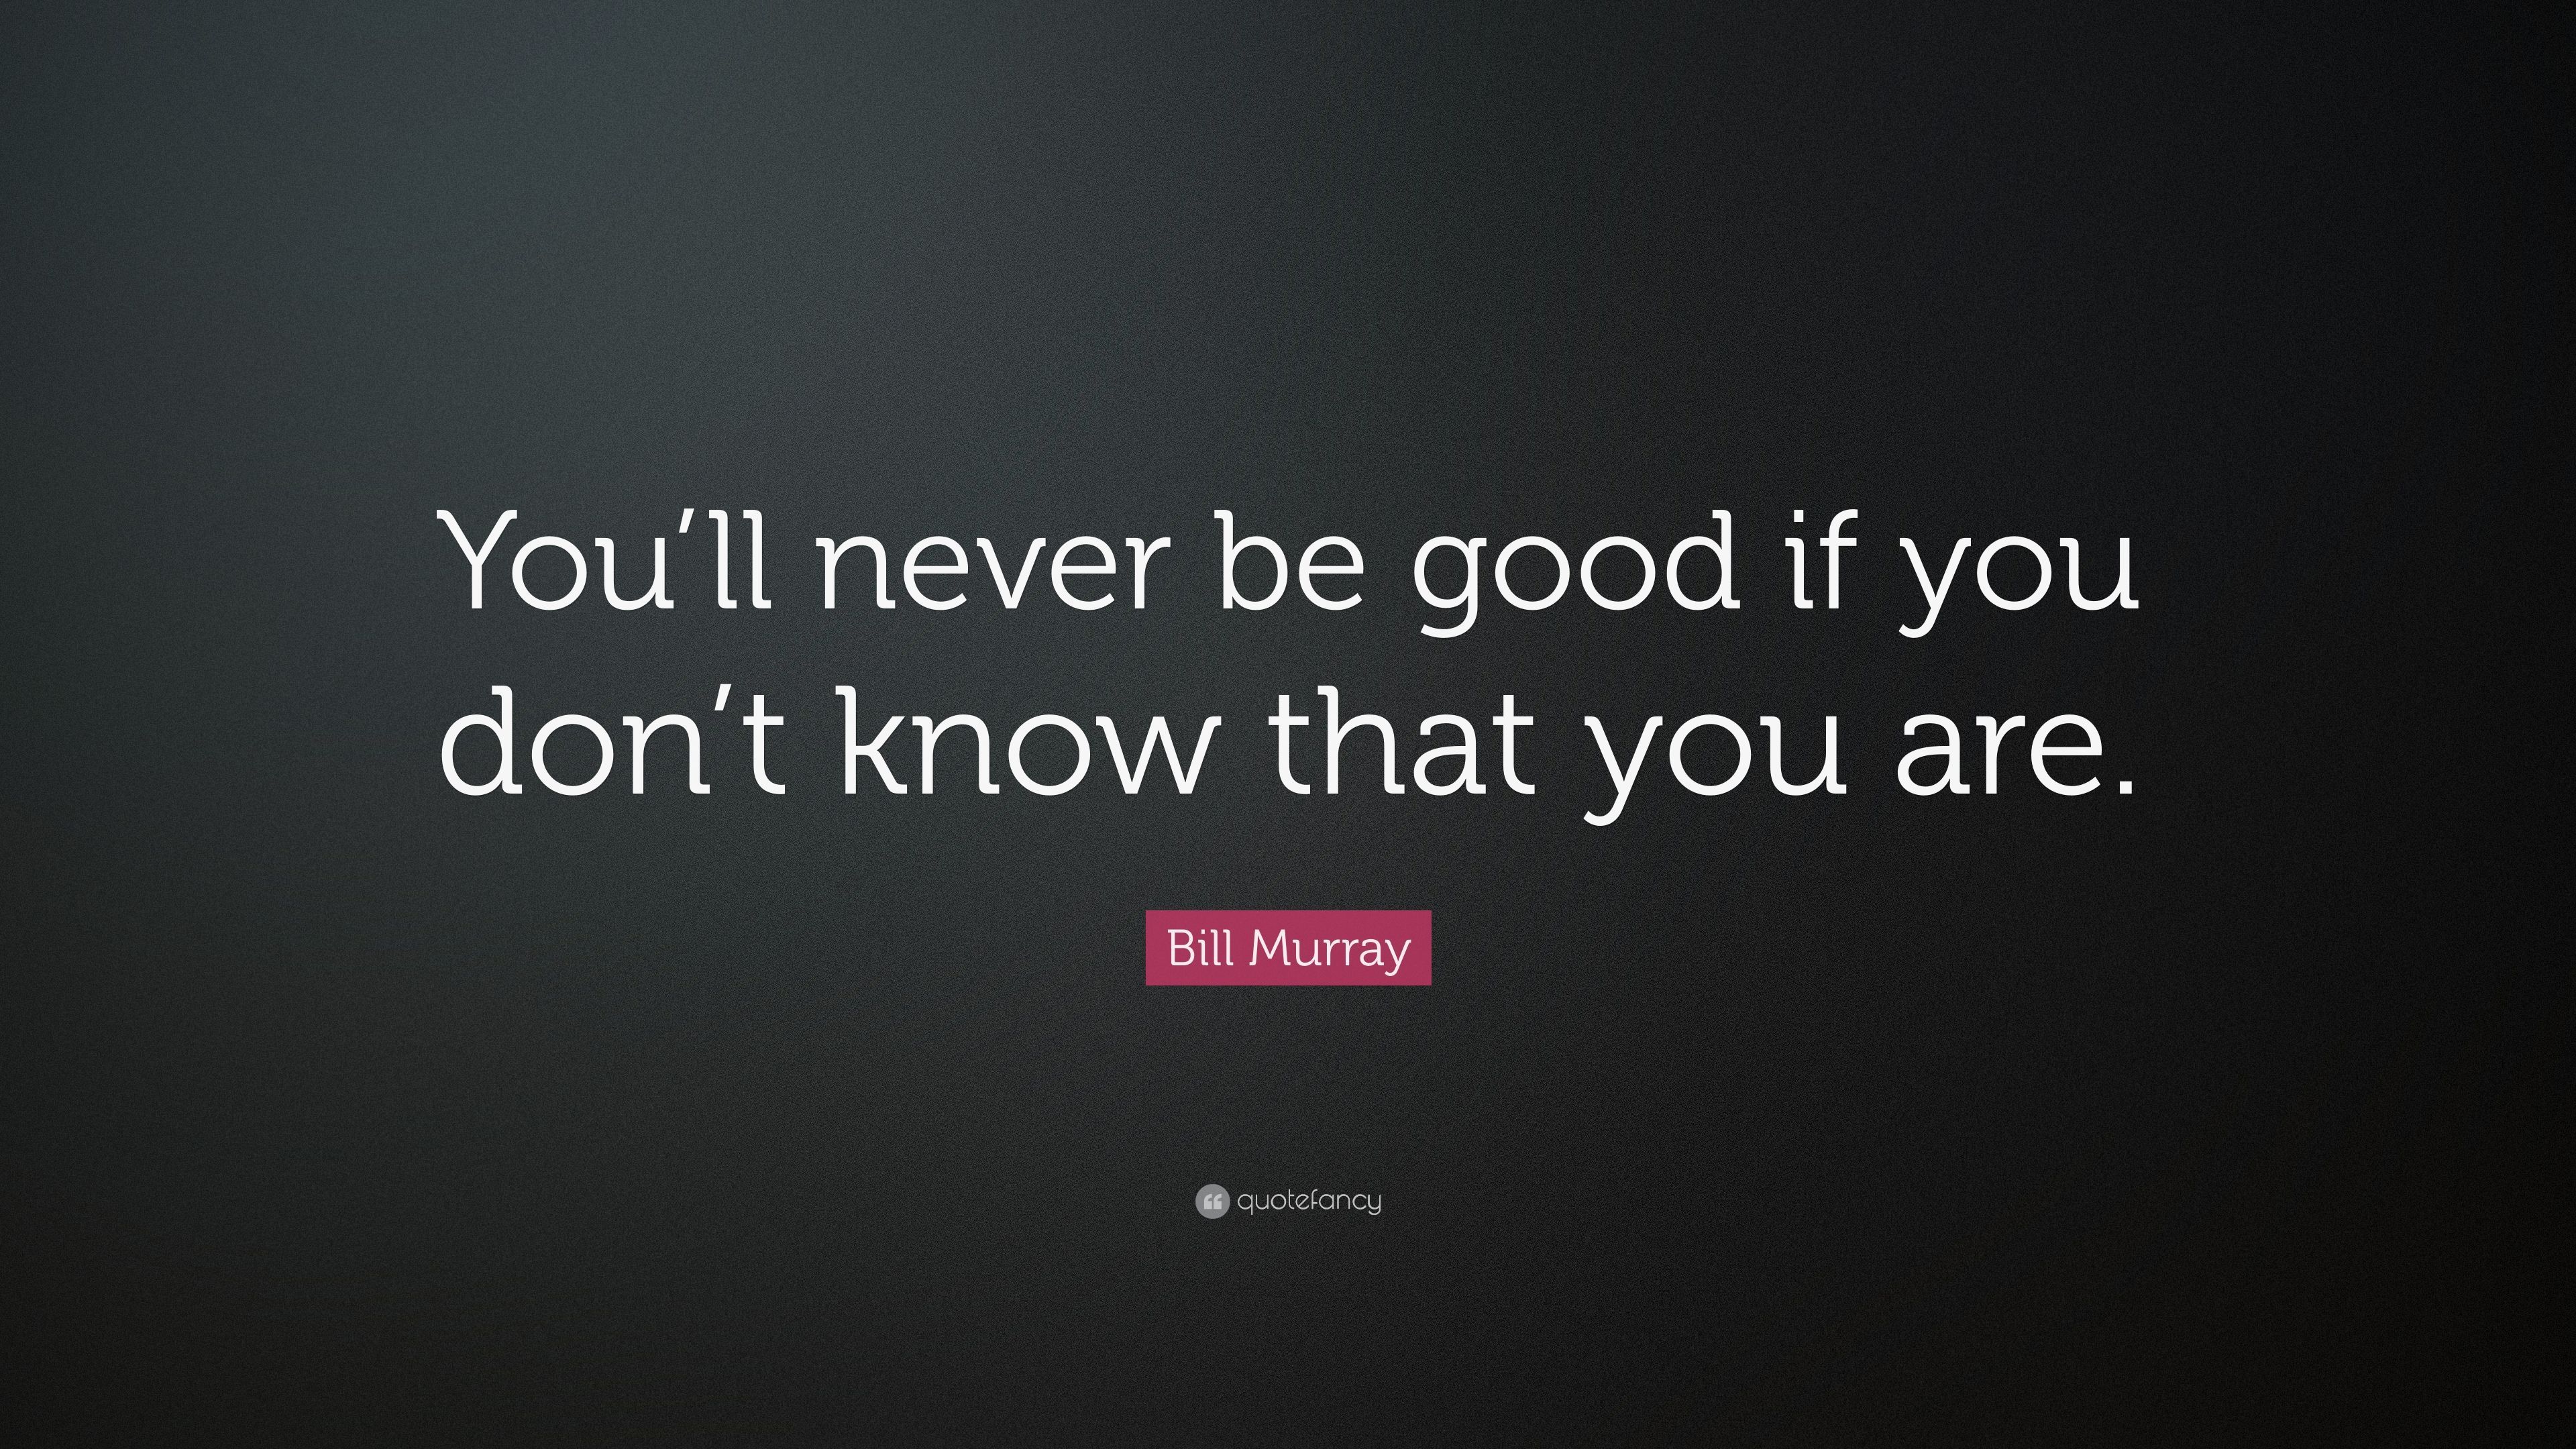 Bill Murray Quote: “You'll never be good if you don't know that